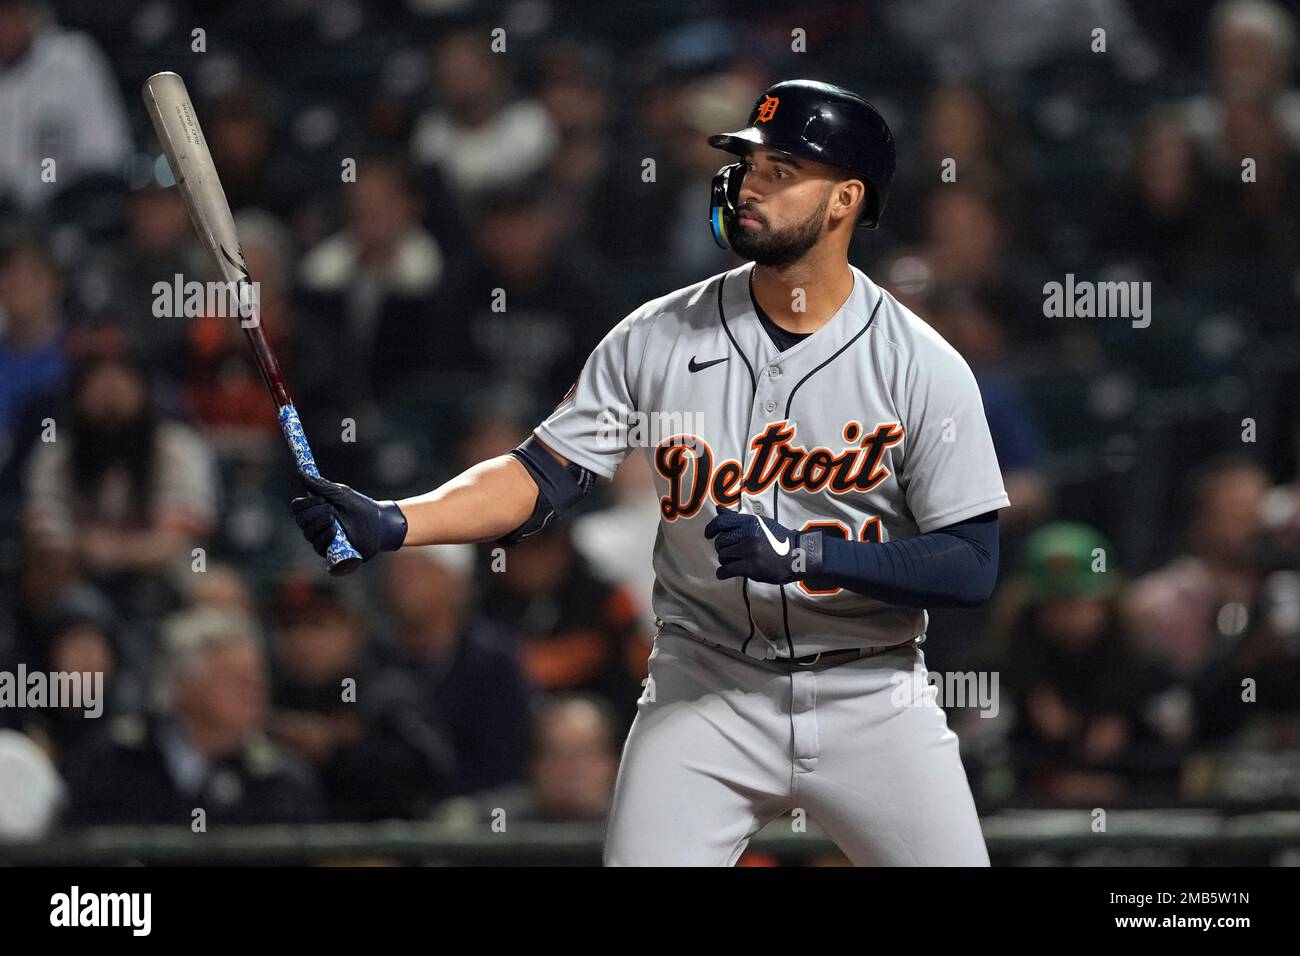 Detroit Tigers rout Texas Rangers, 14-7, as Riley Greene goes 2-for-3